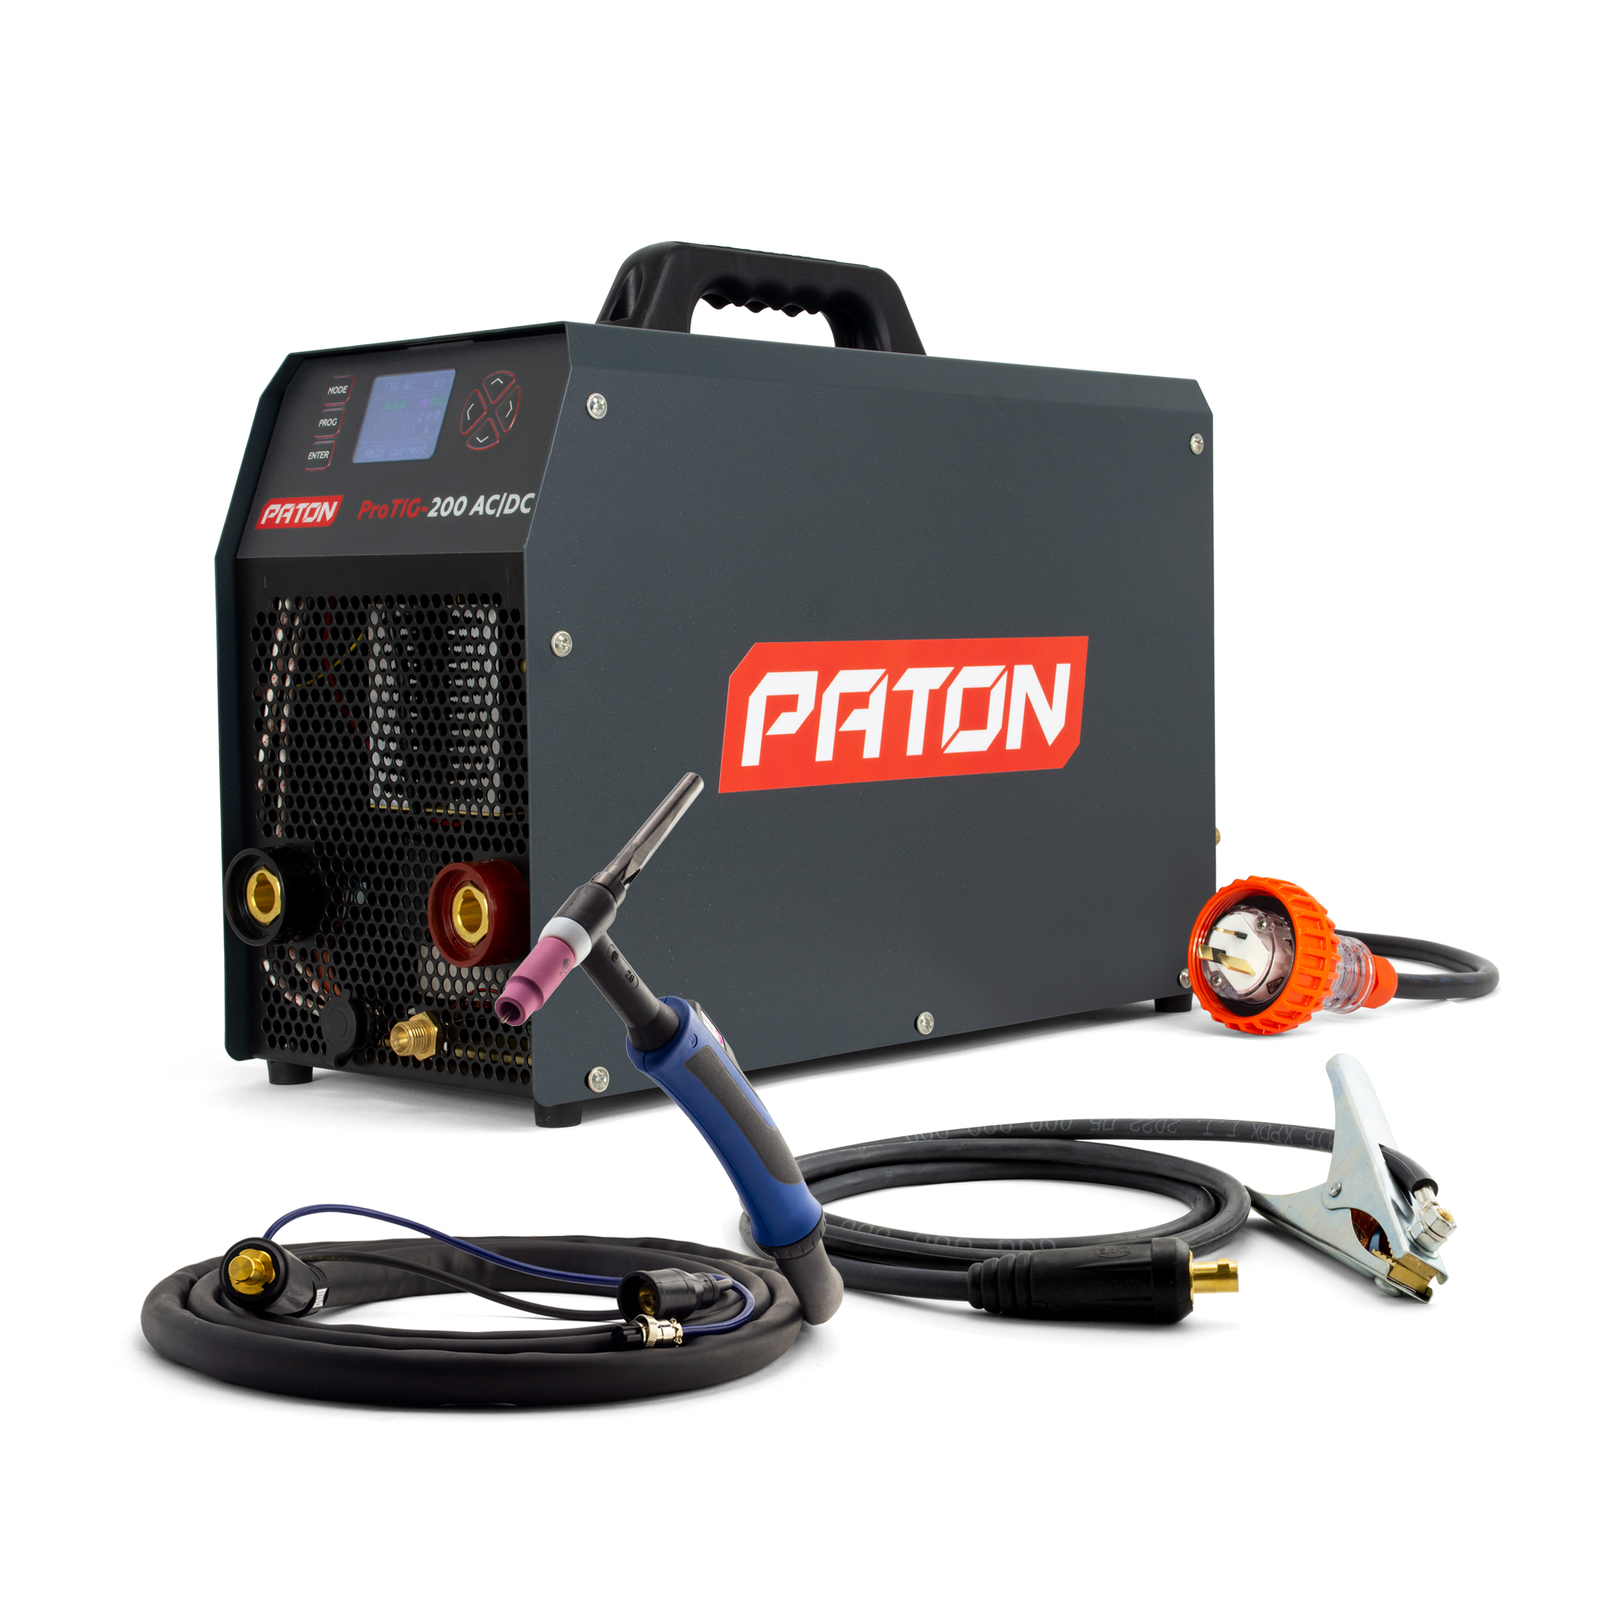 PATON AC/DC TIG 200 Amp High Frequency TIG Welder - Made in